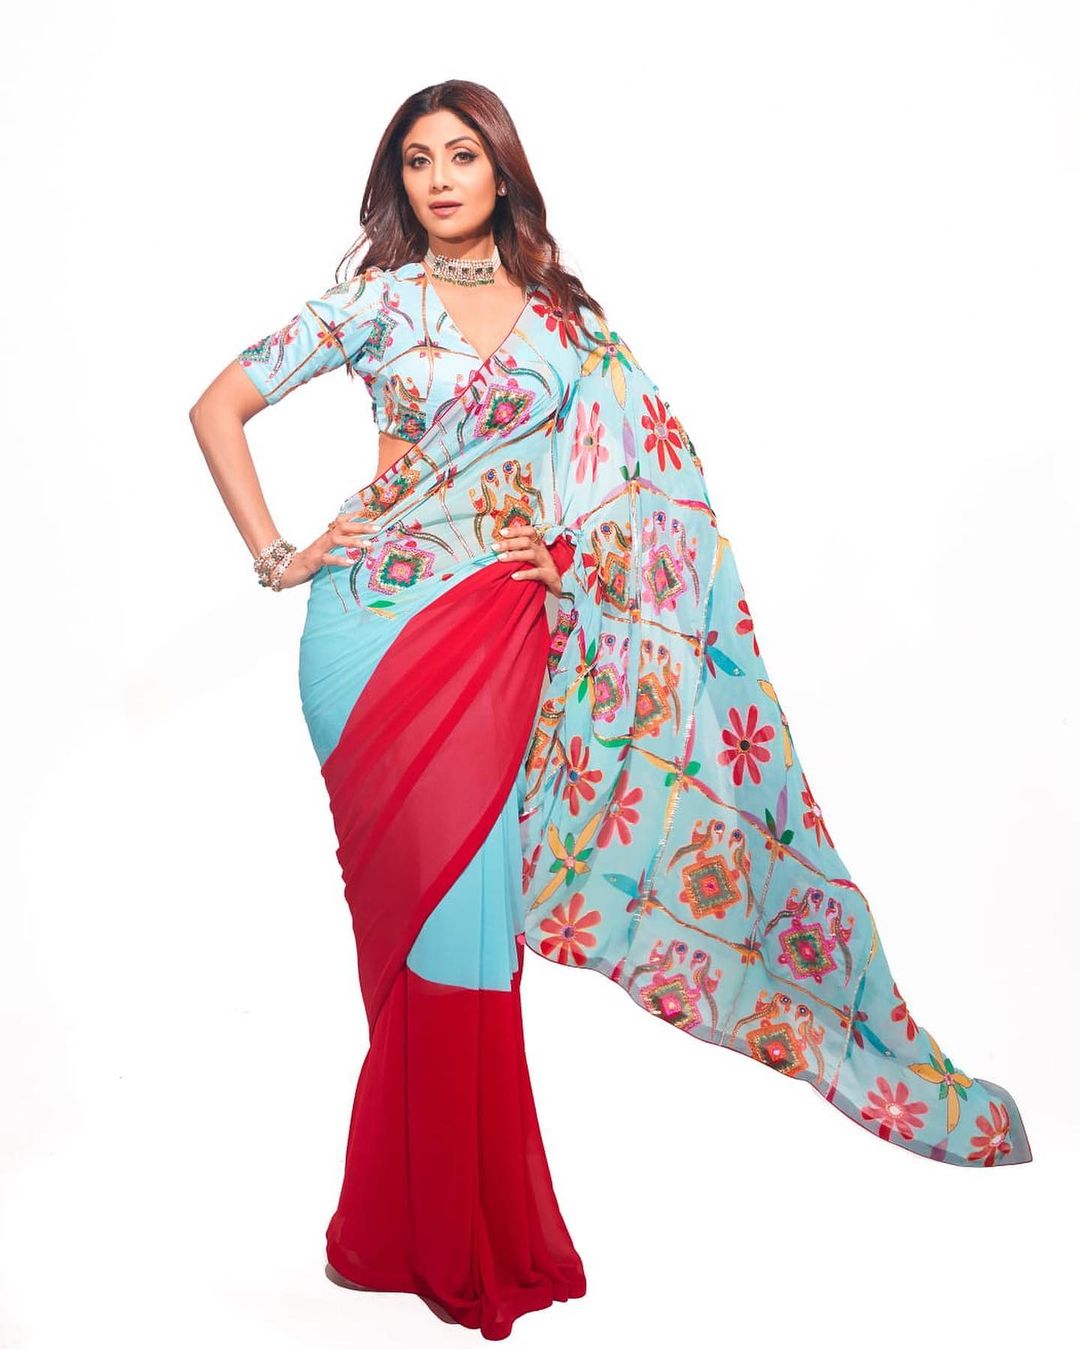 Shilpa Shetty Kundra shows off toned figure in the floral printed saree. 